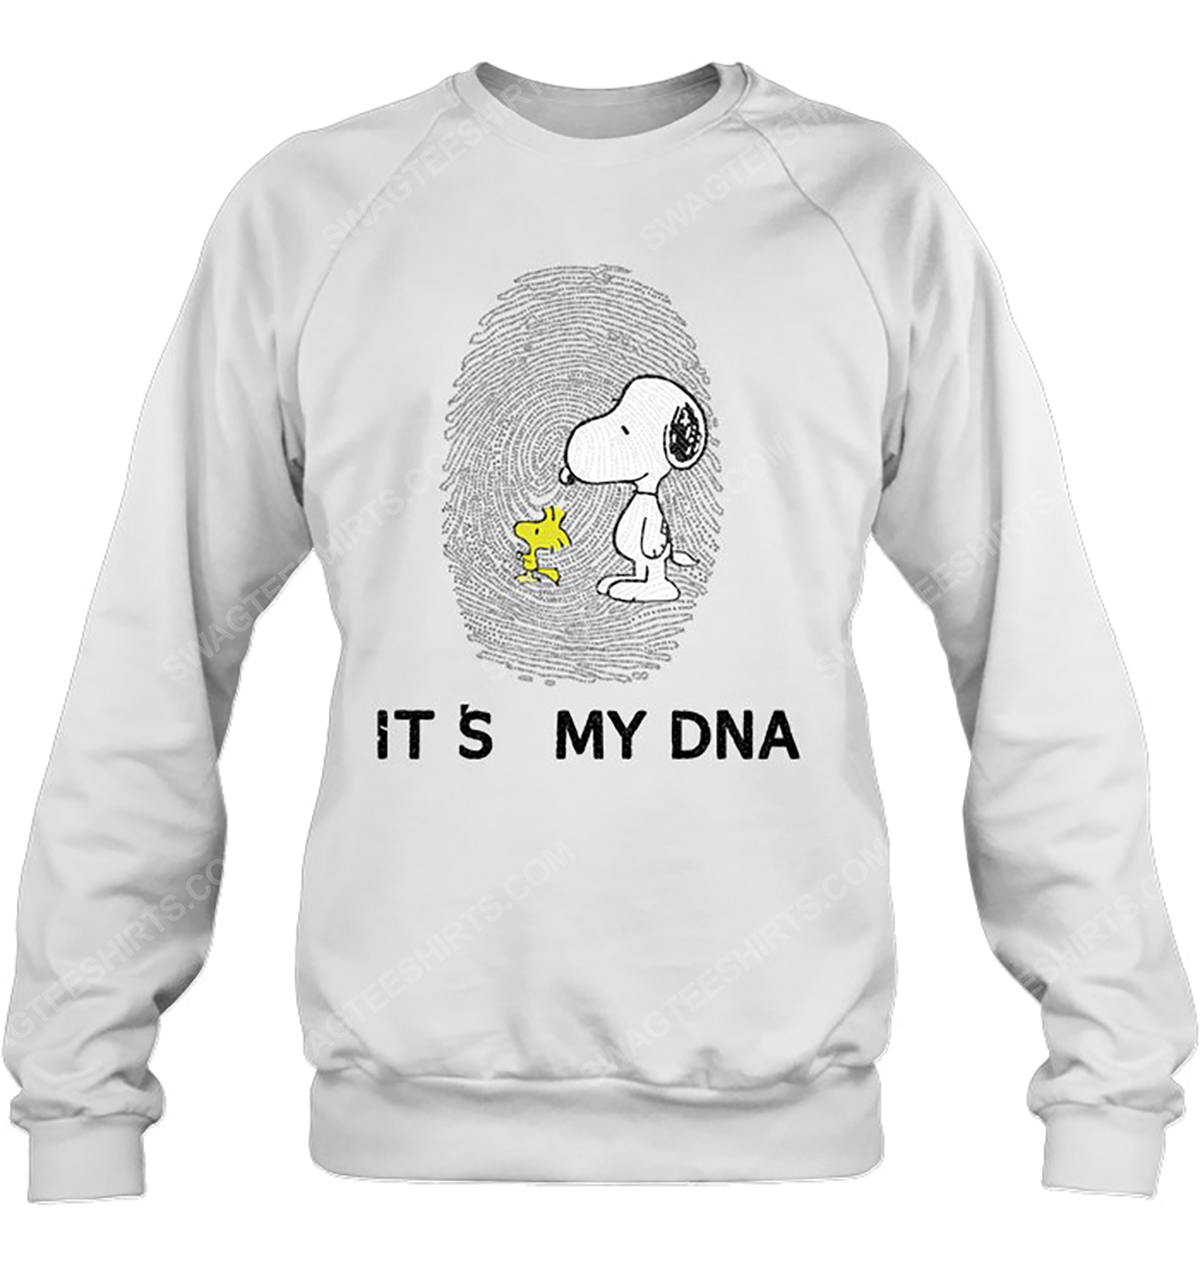 The peanuts snoopy and woodstock it's my dna sweatshirt 1